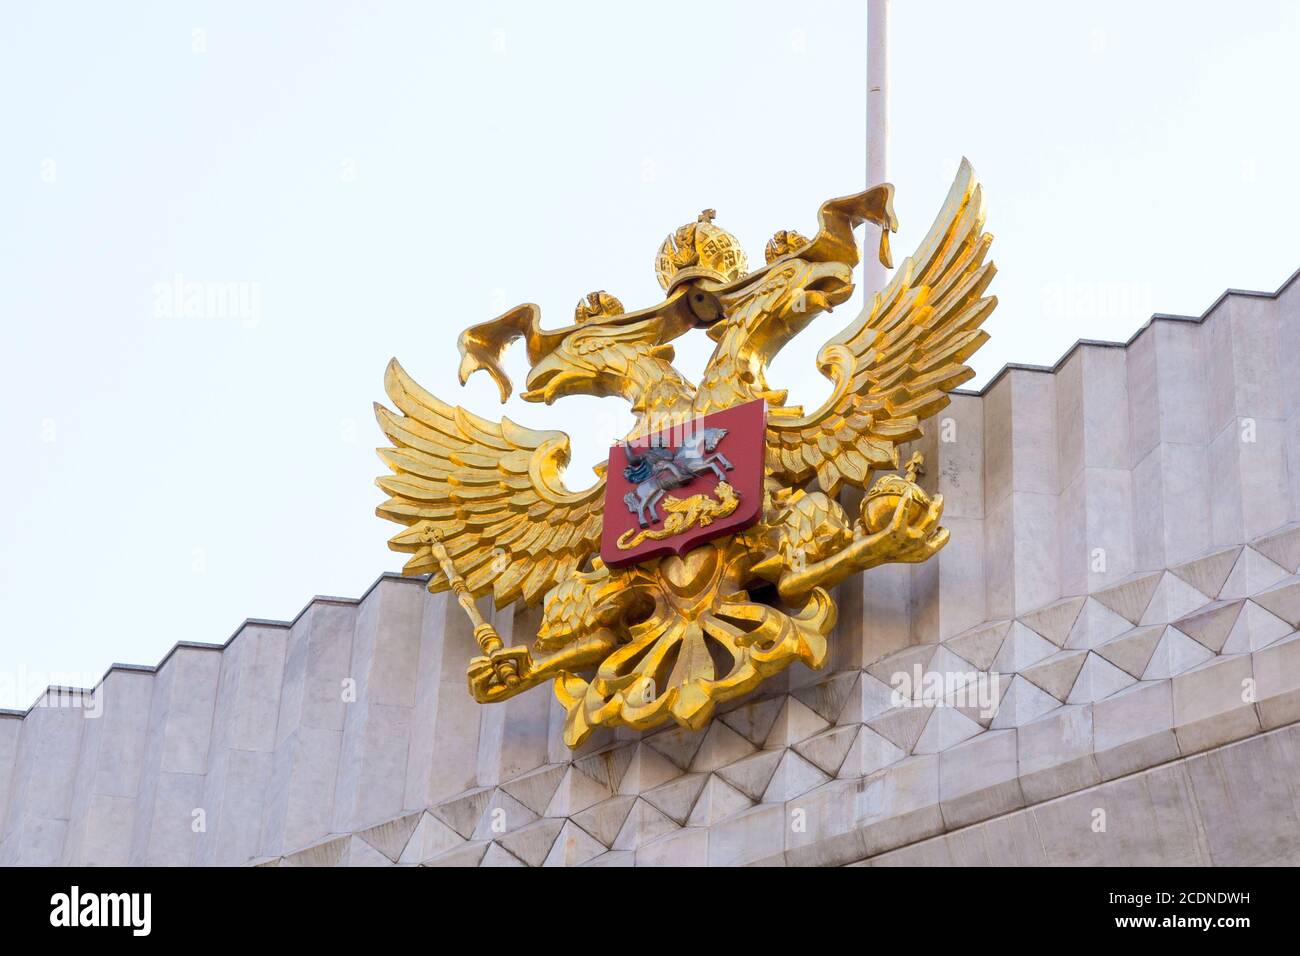 State symbols of Russia's, emblem of the double-headed eagle. Stock Photo